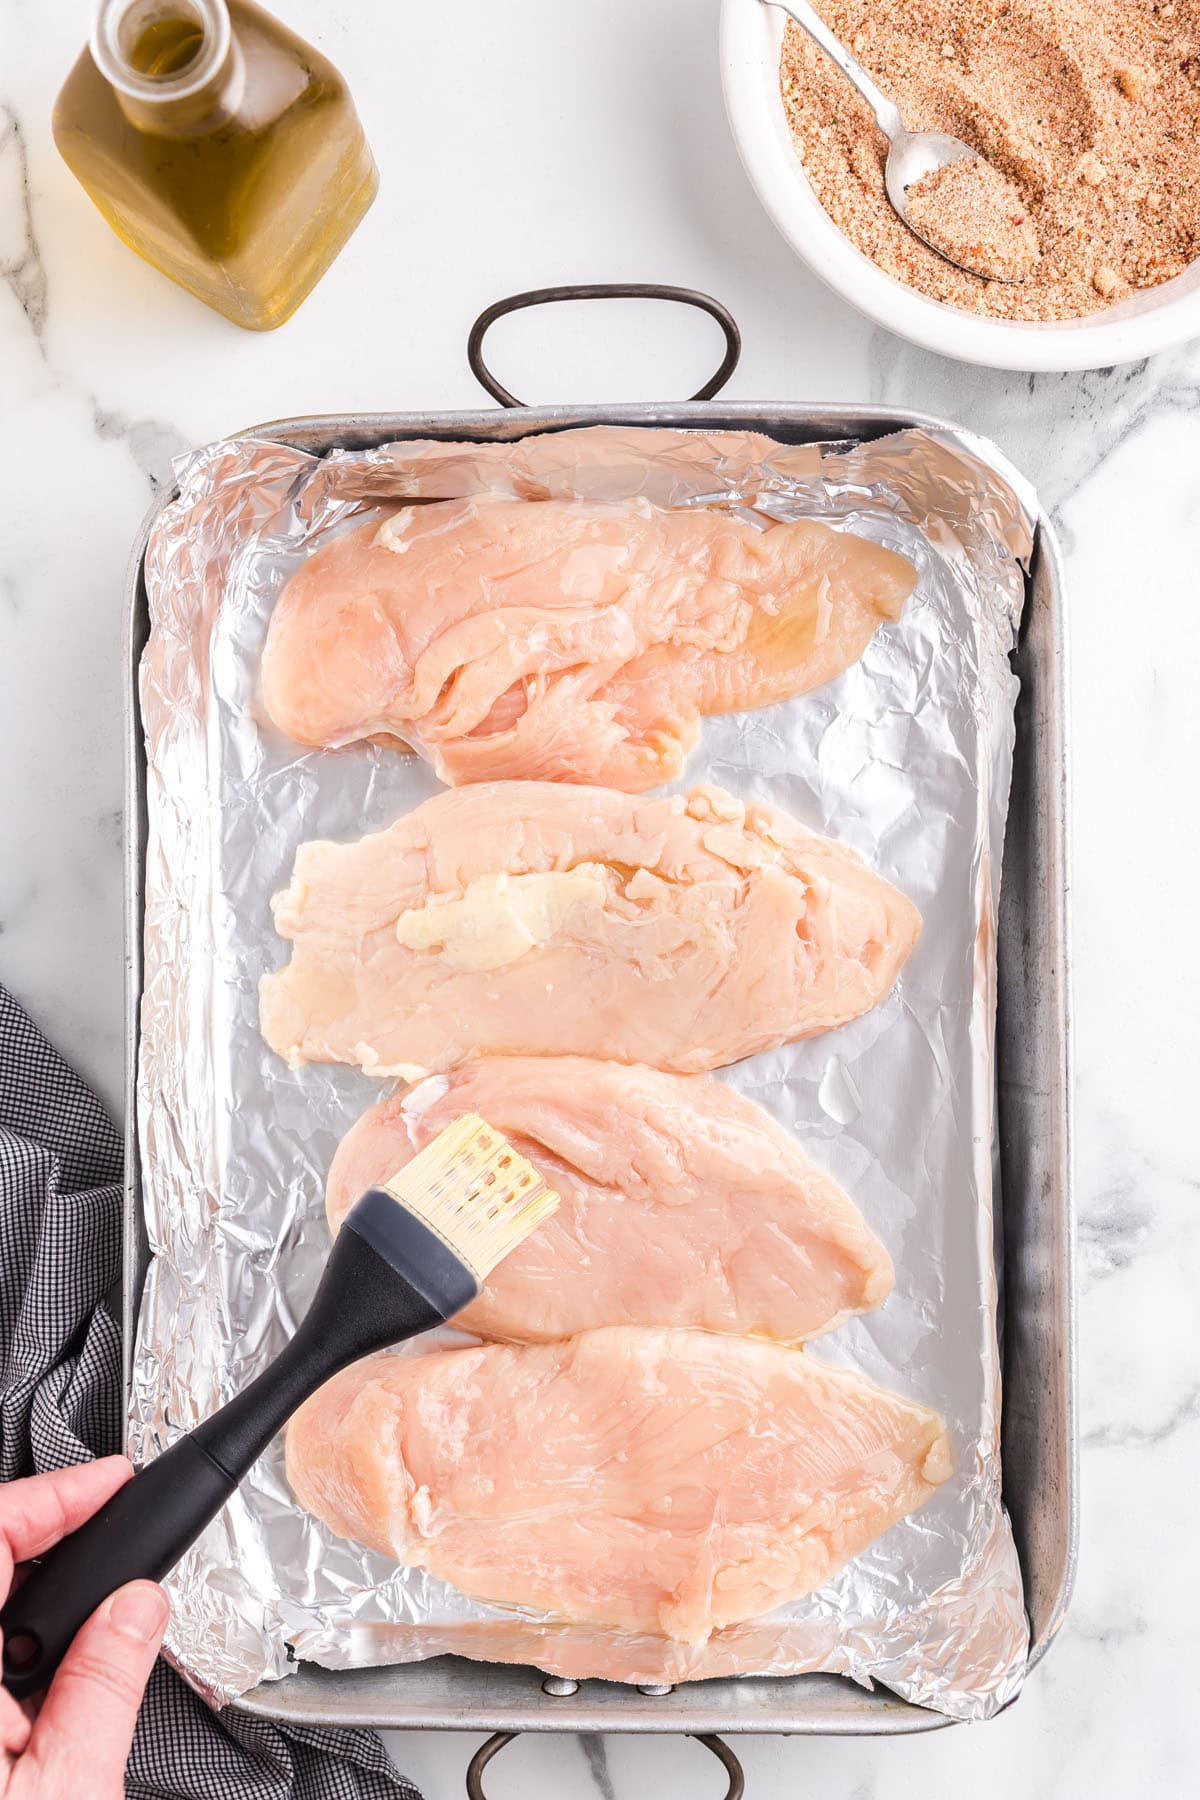 Using a pastry brush, brush both sides of the chicken pieces with olive oil.